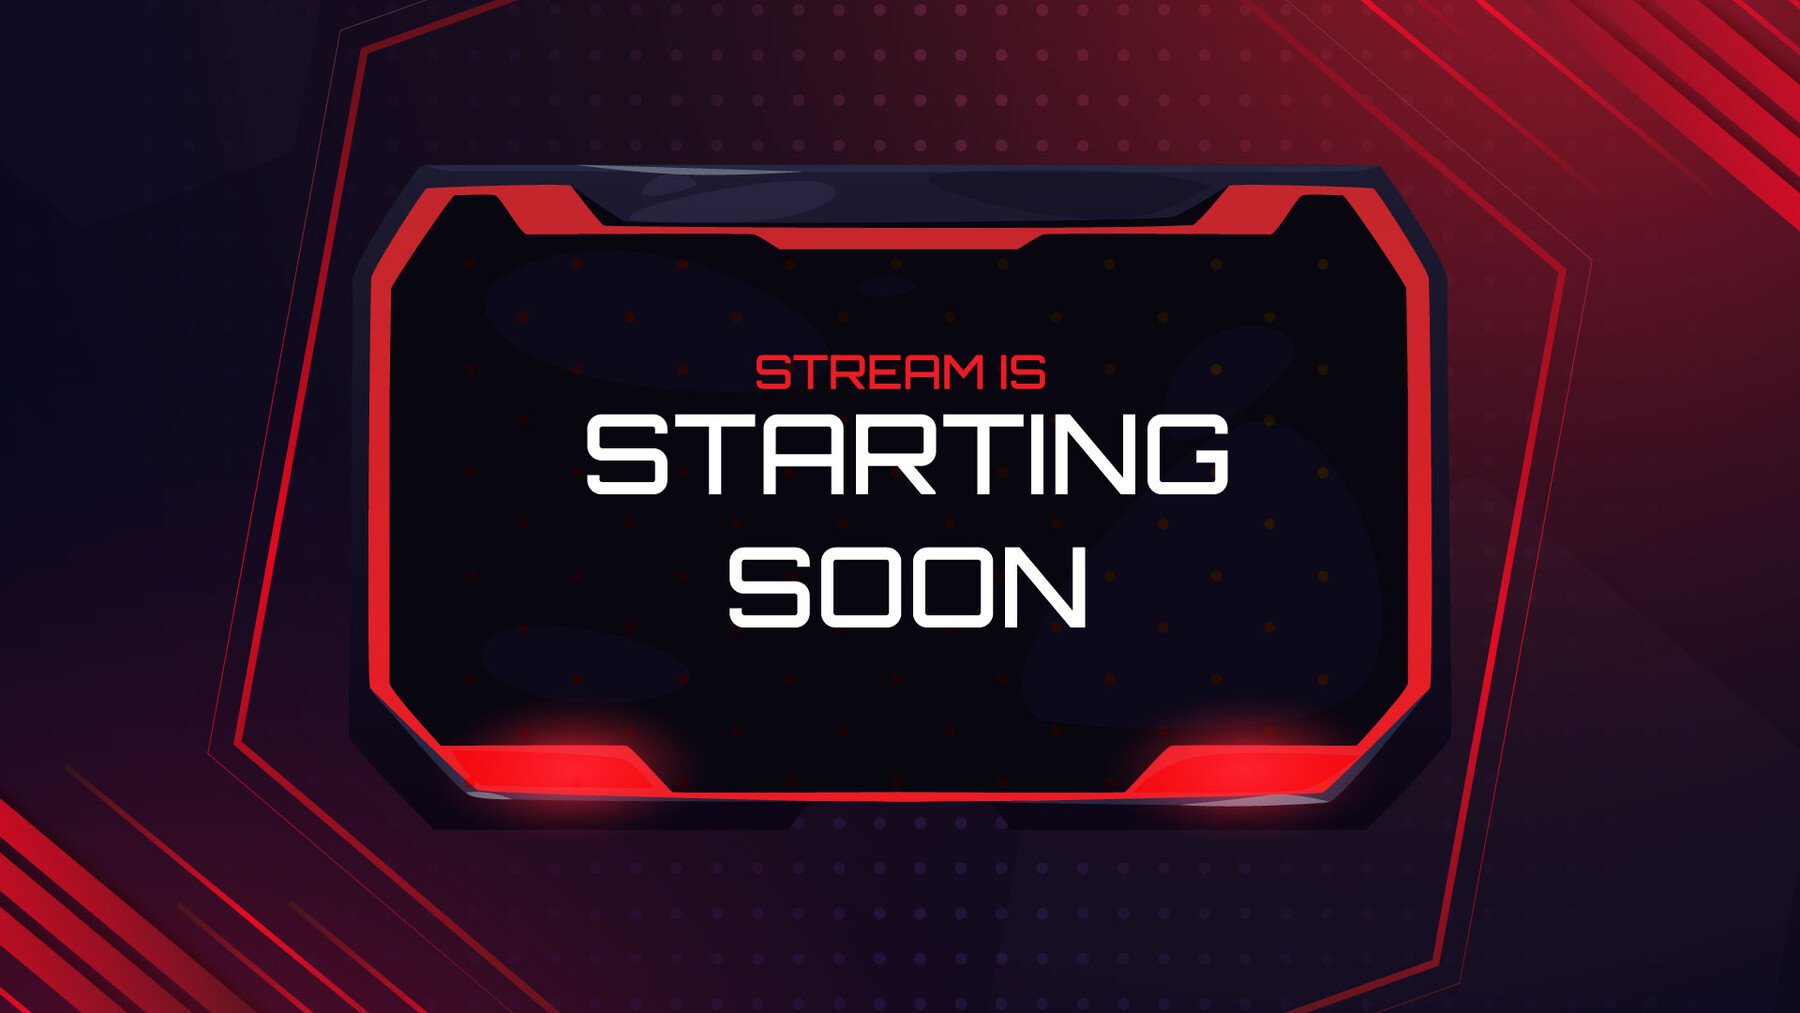 ArtStation - Overlays Stream Classic Red Style Twitch/YouTube Pack ...